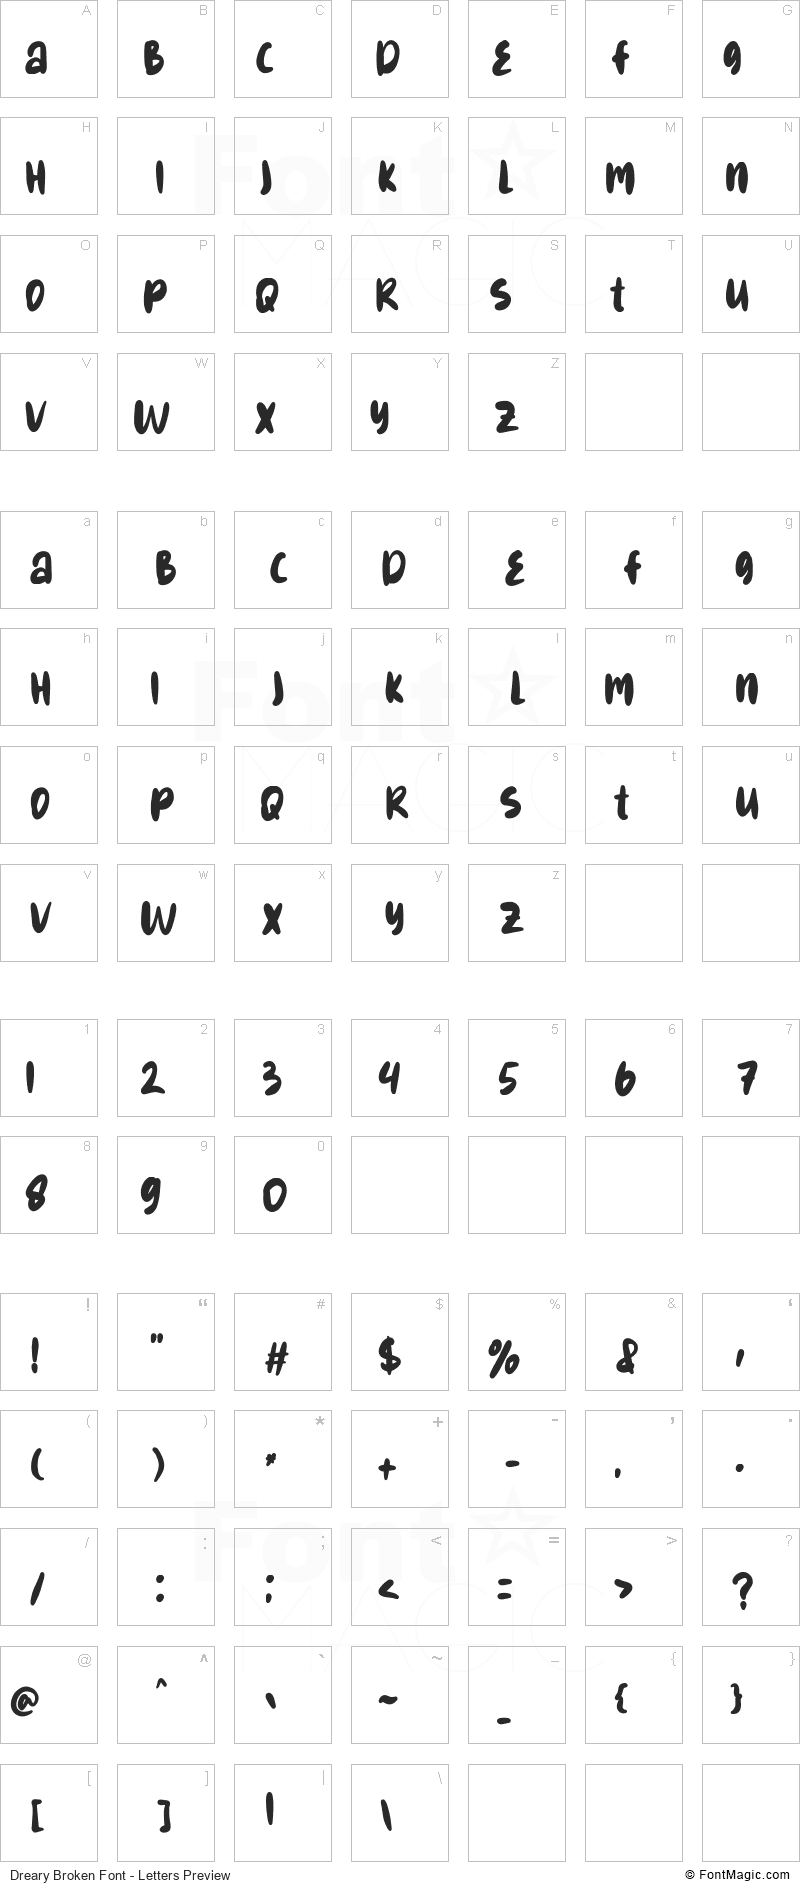 Dreary Broken Font - All Latters Preview Chart